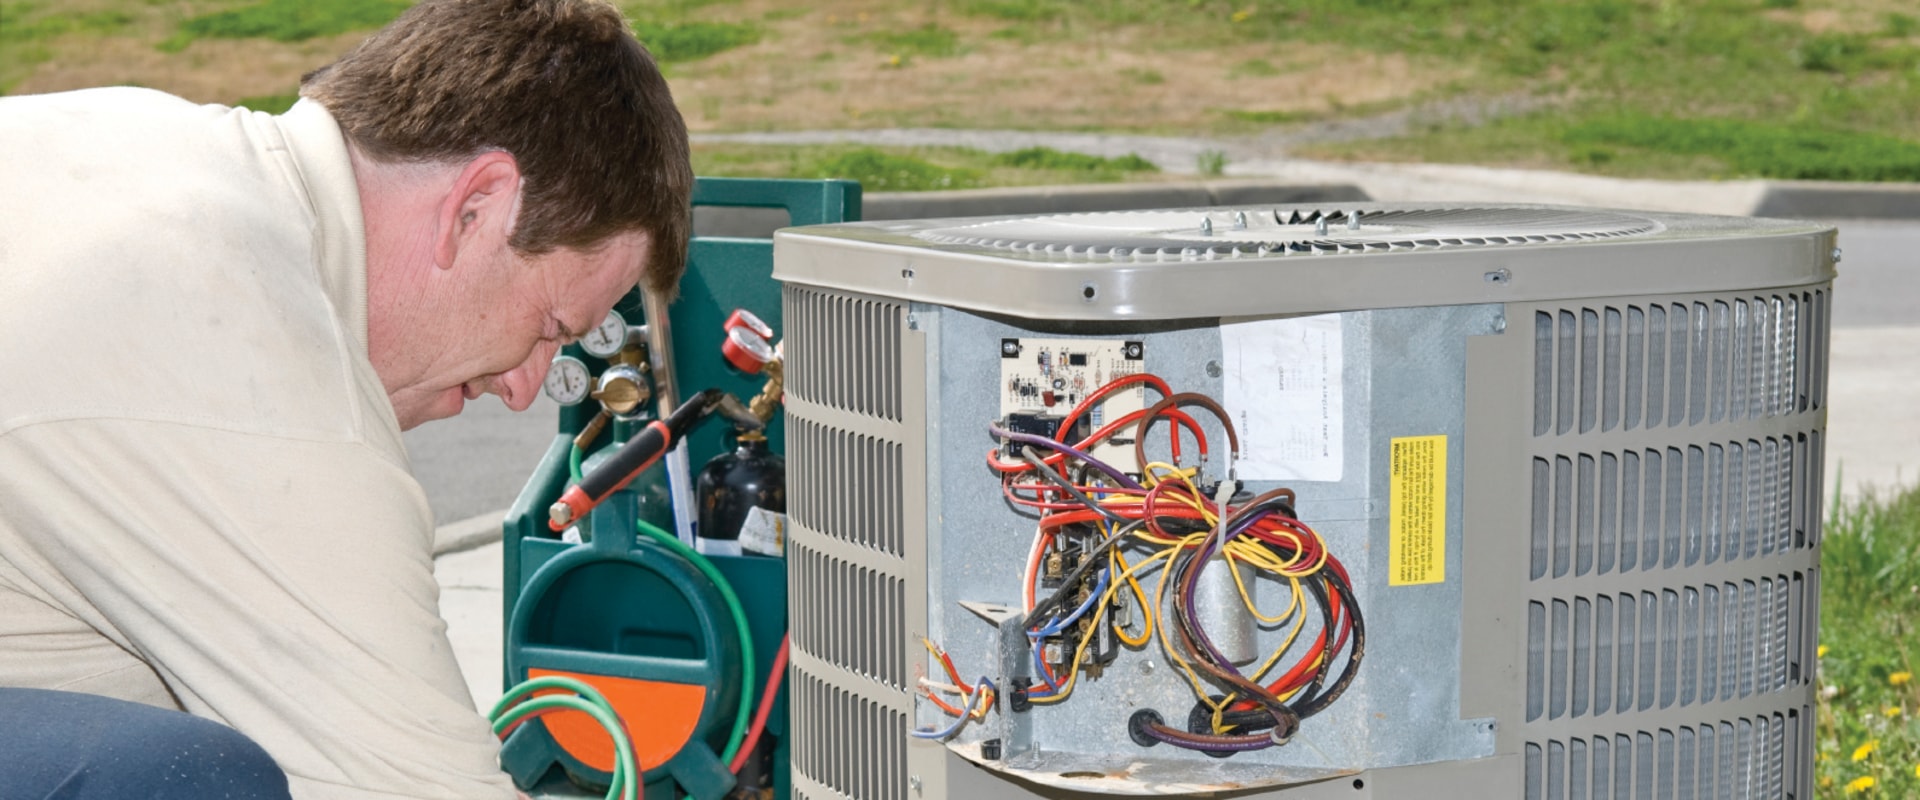 Replacing Your HVAC System in West Palm Beach, FL: Zoning Regulations to Consider